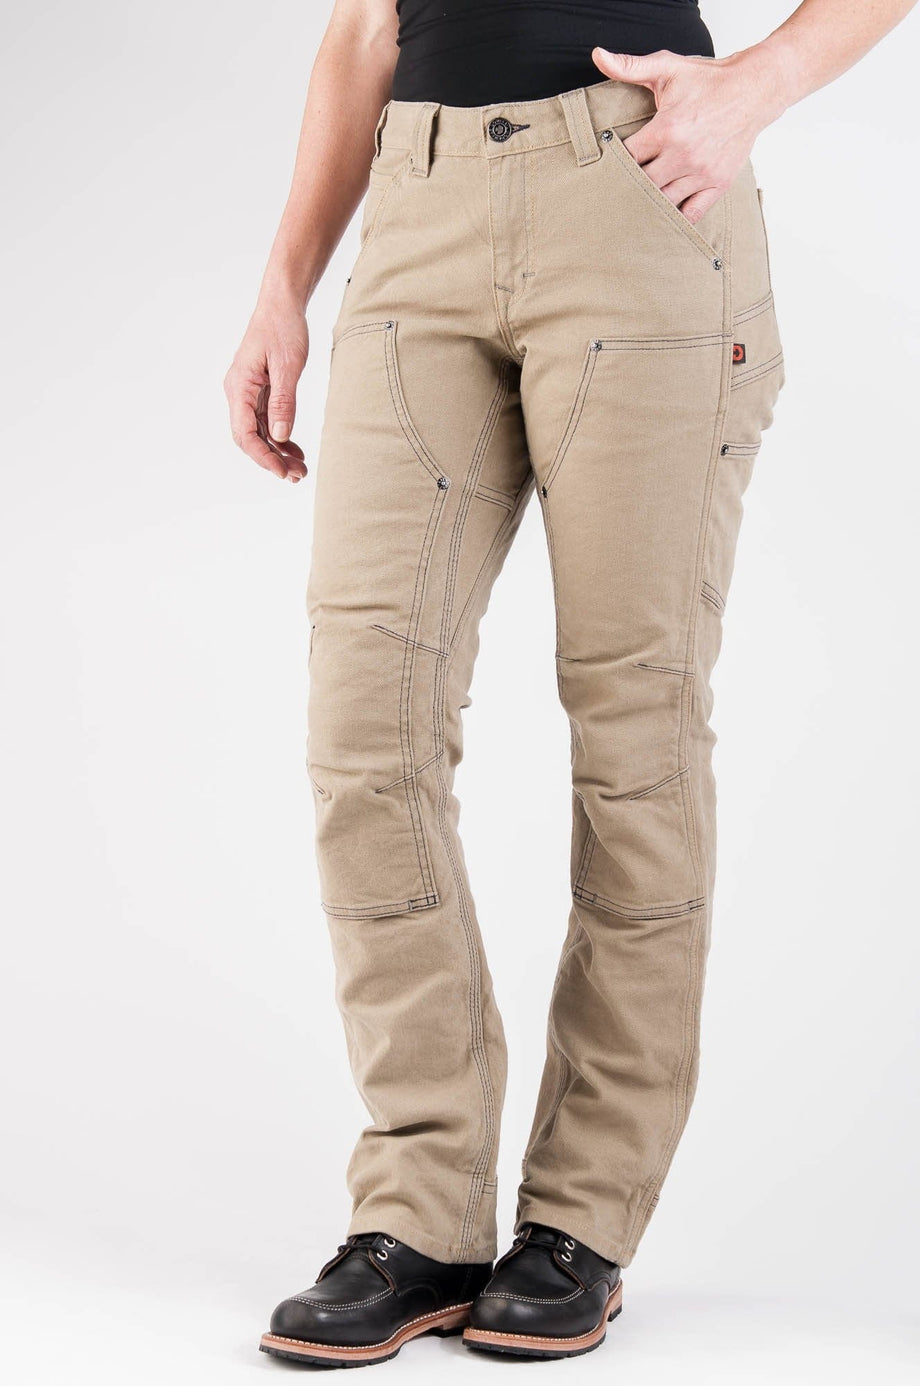 Dovetail, Codura and Sapphire Create a New Cargo Pant